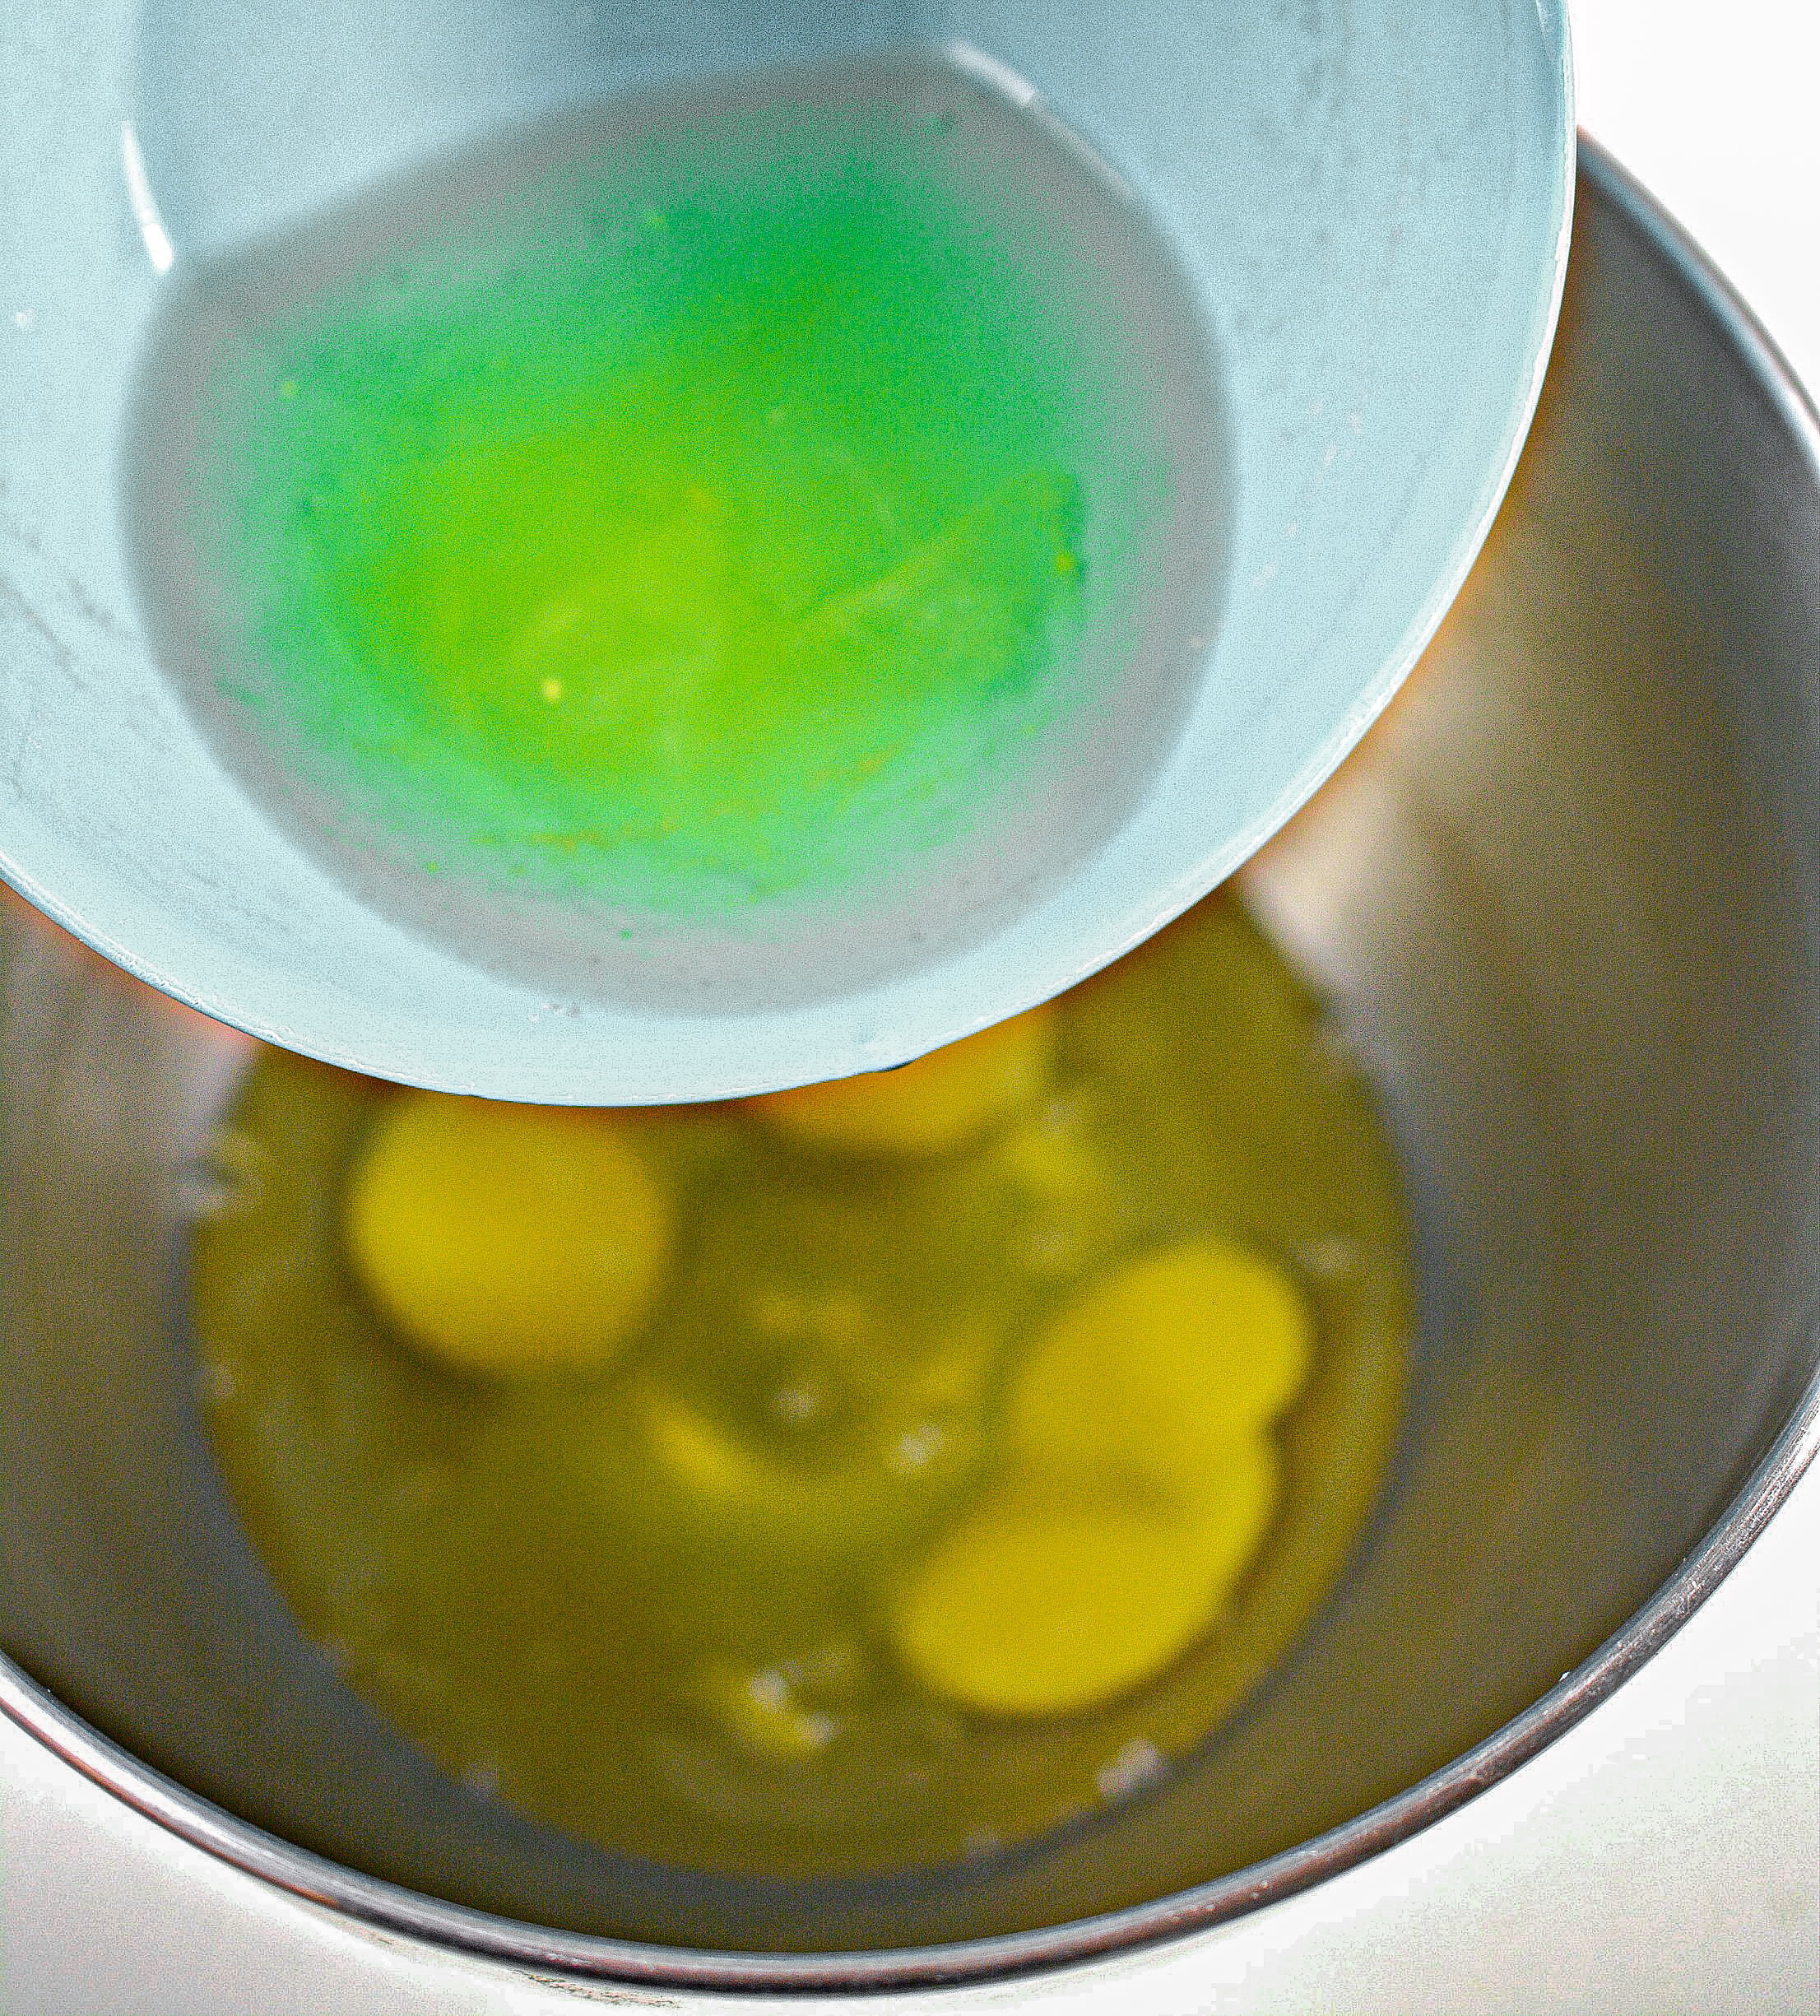 In a mixing bowl, blend the eggs, egg whites and Greek yogurt until frothy.